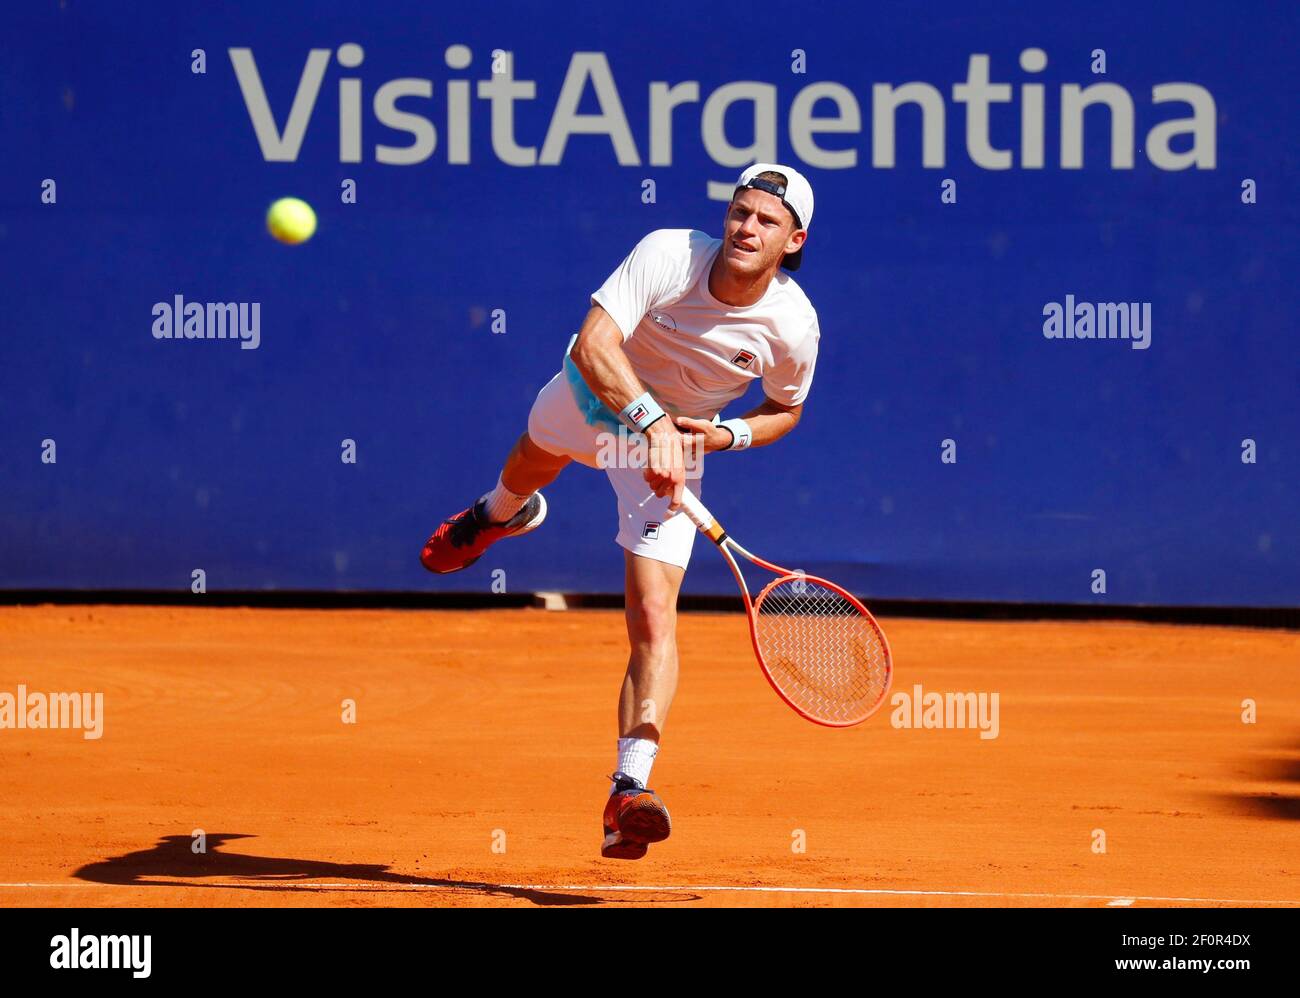 Tennis - ATP 250 - Argentina Open - Buenos Aires Lawn Tennis Club, Buenos  Aires, Argentina - March 7, 2021 Argentina's Diego Schwartzman in action  during the final against Argentina's Francisco Cerundolo REUTERS/Agustin  Marcarian Stock Photo - Alamy